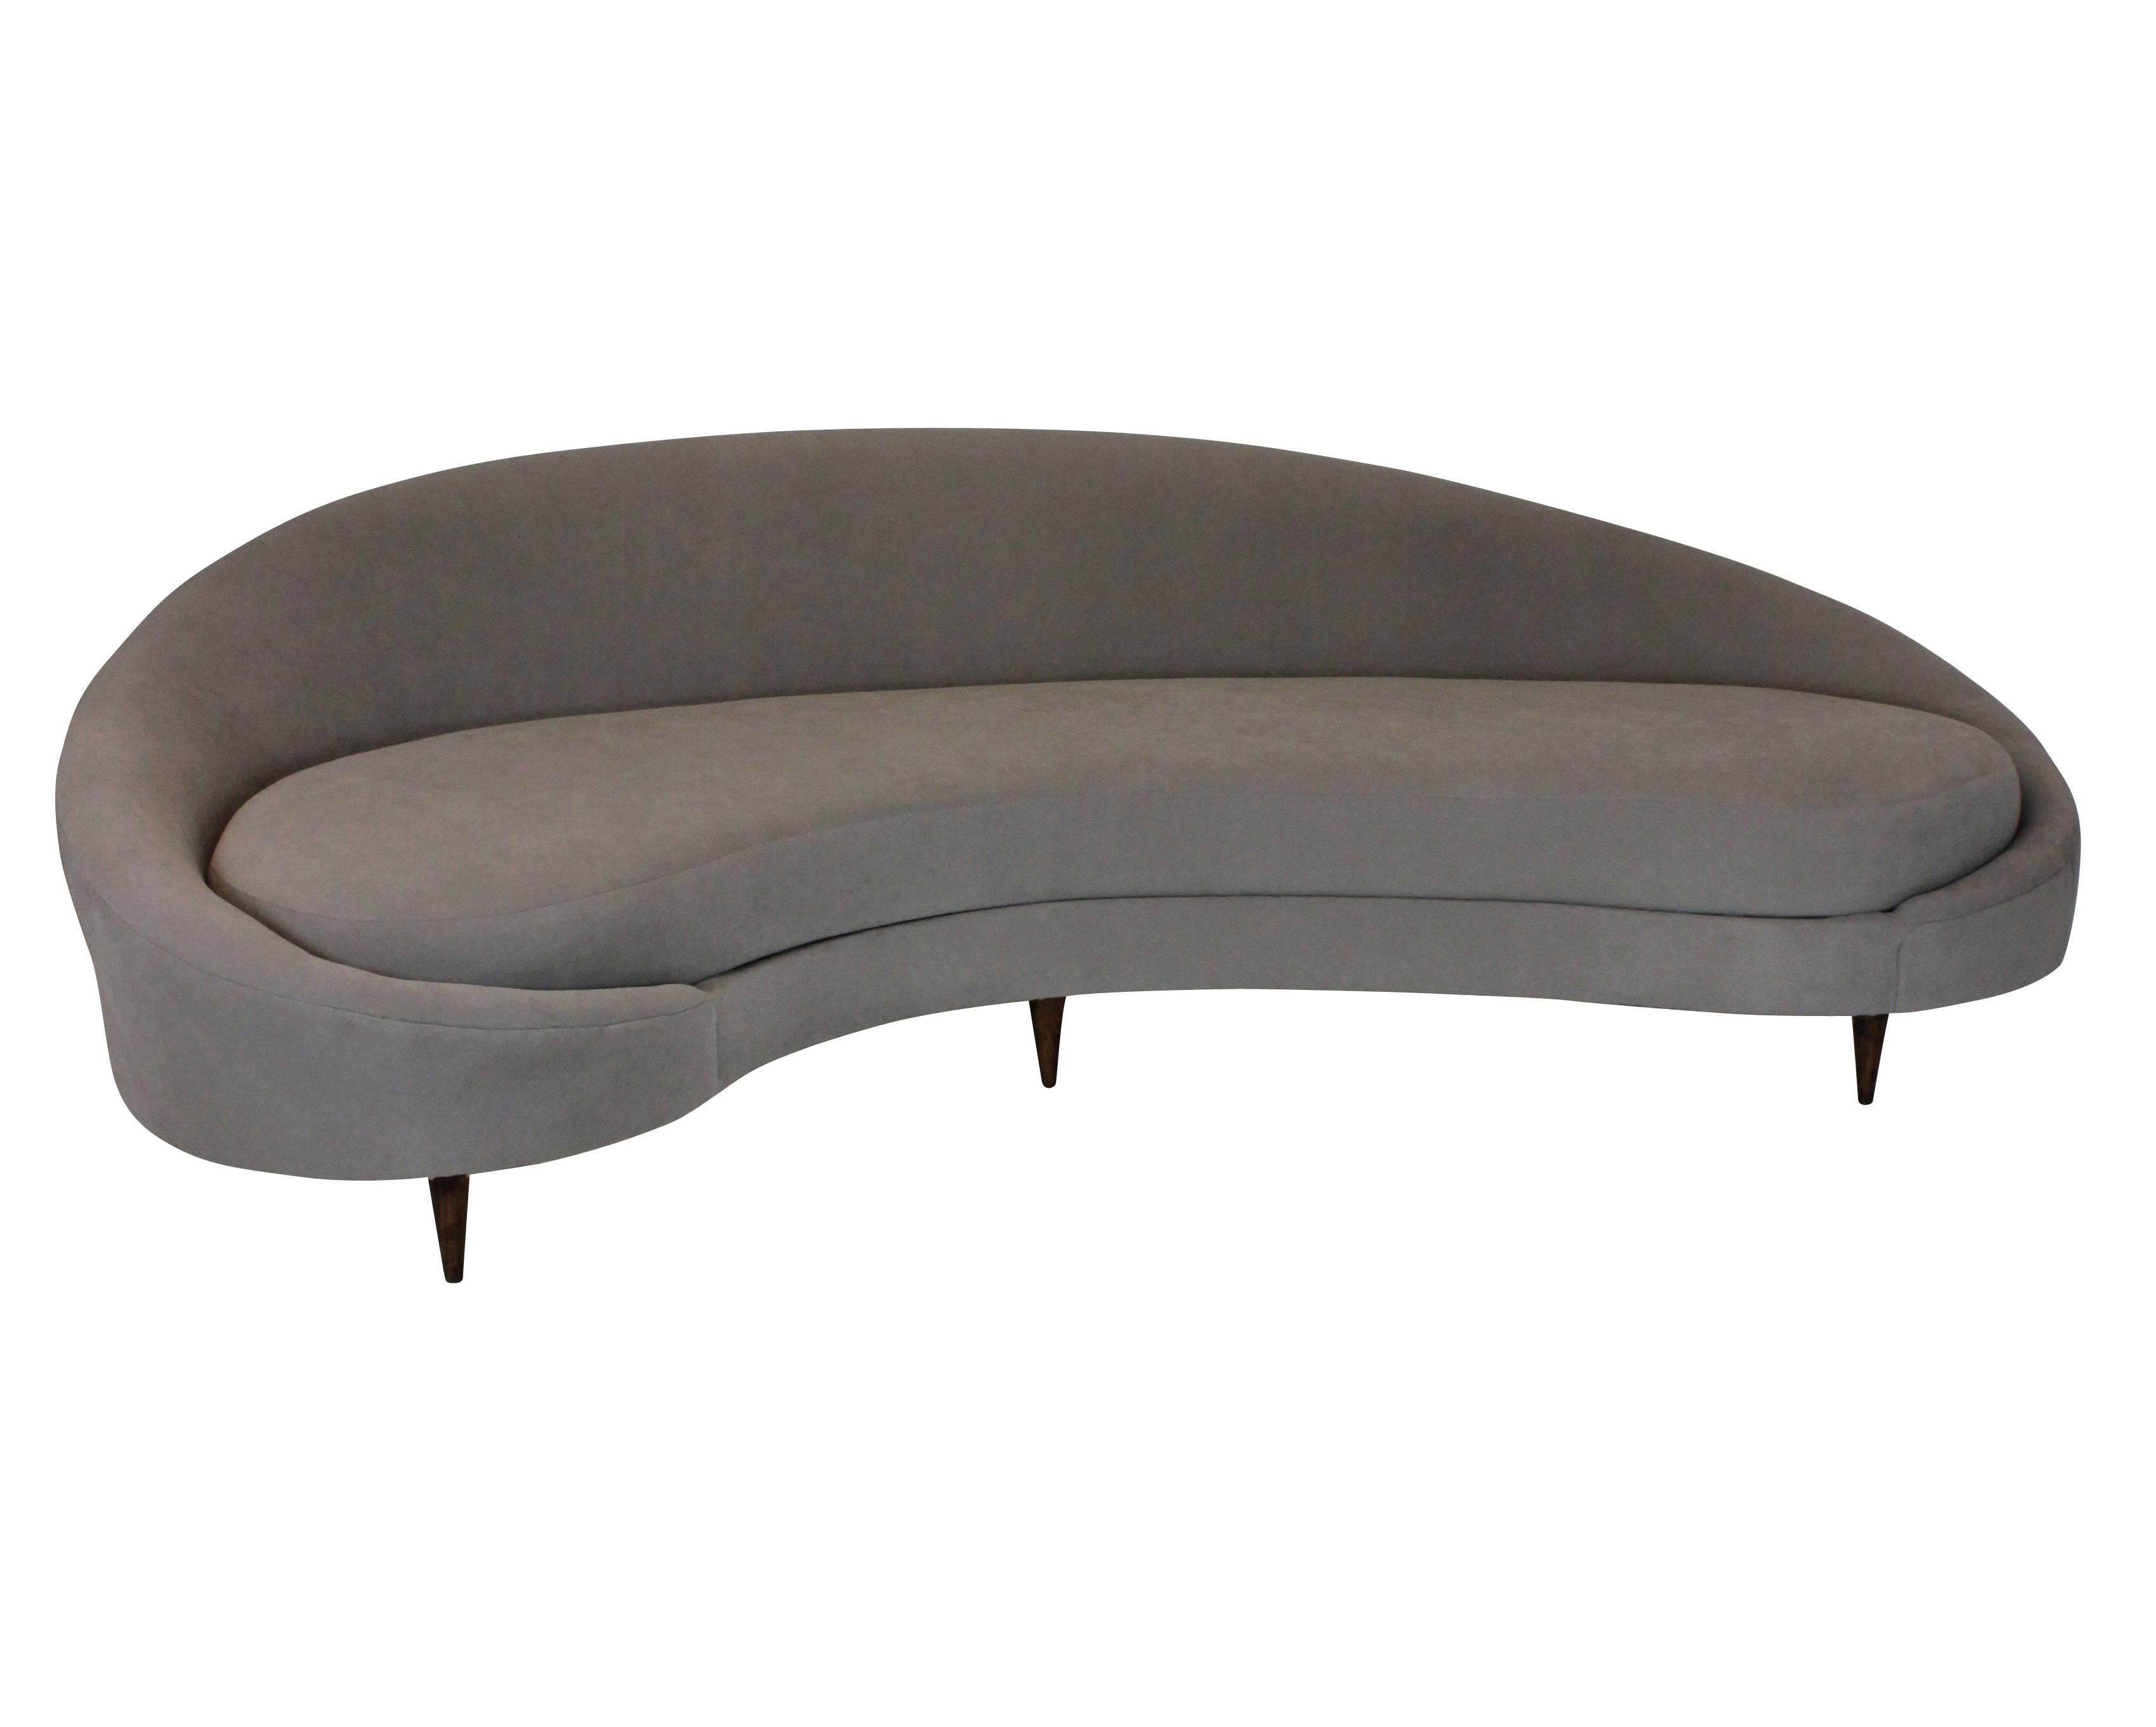 A large sculptural sofa by Ico Parisi of good proportions, upholstered in stone colored faux moleskin, on turned walnut feet.
     